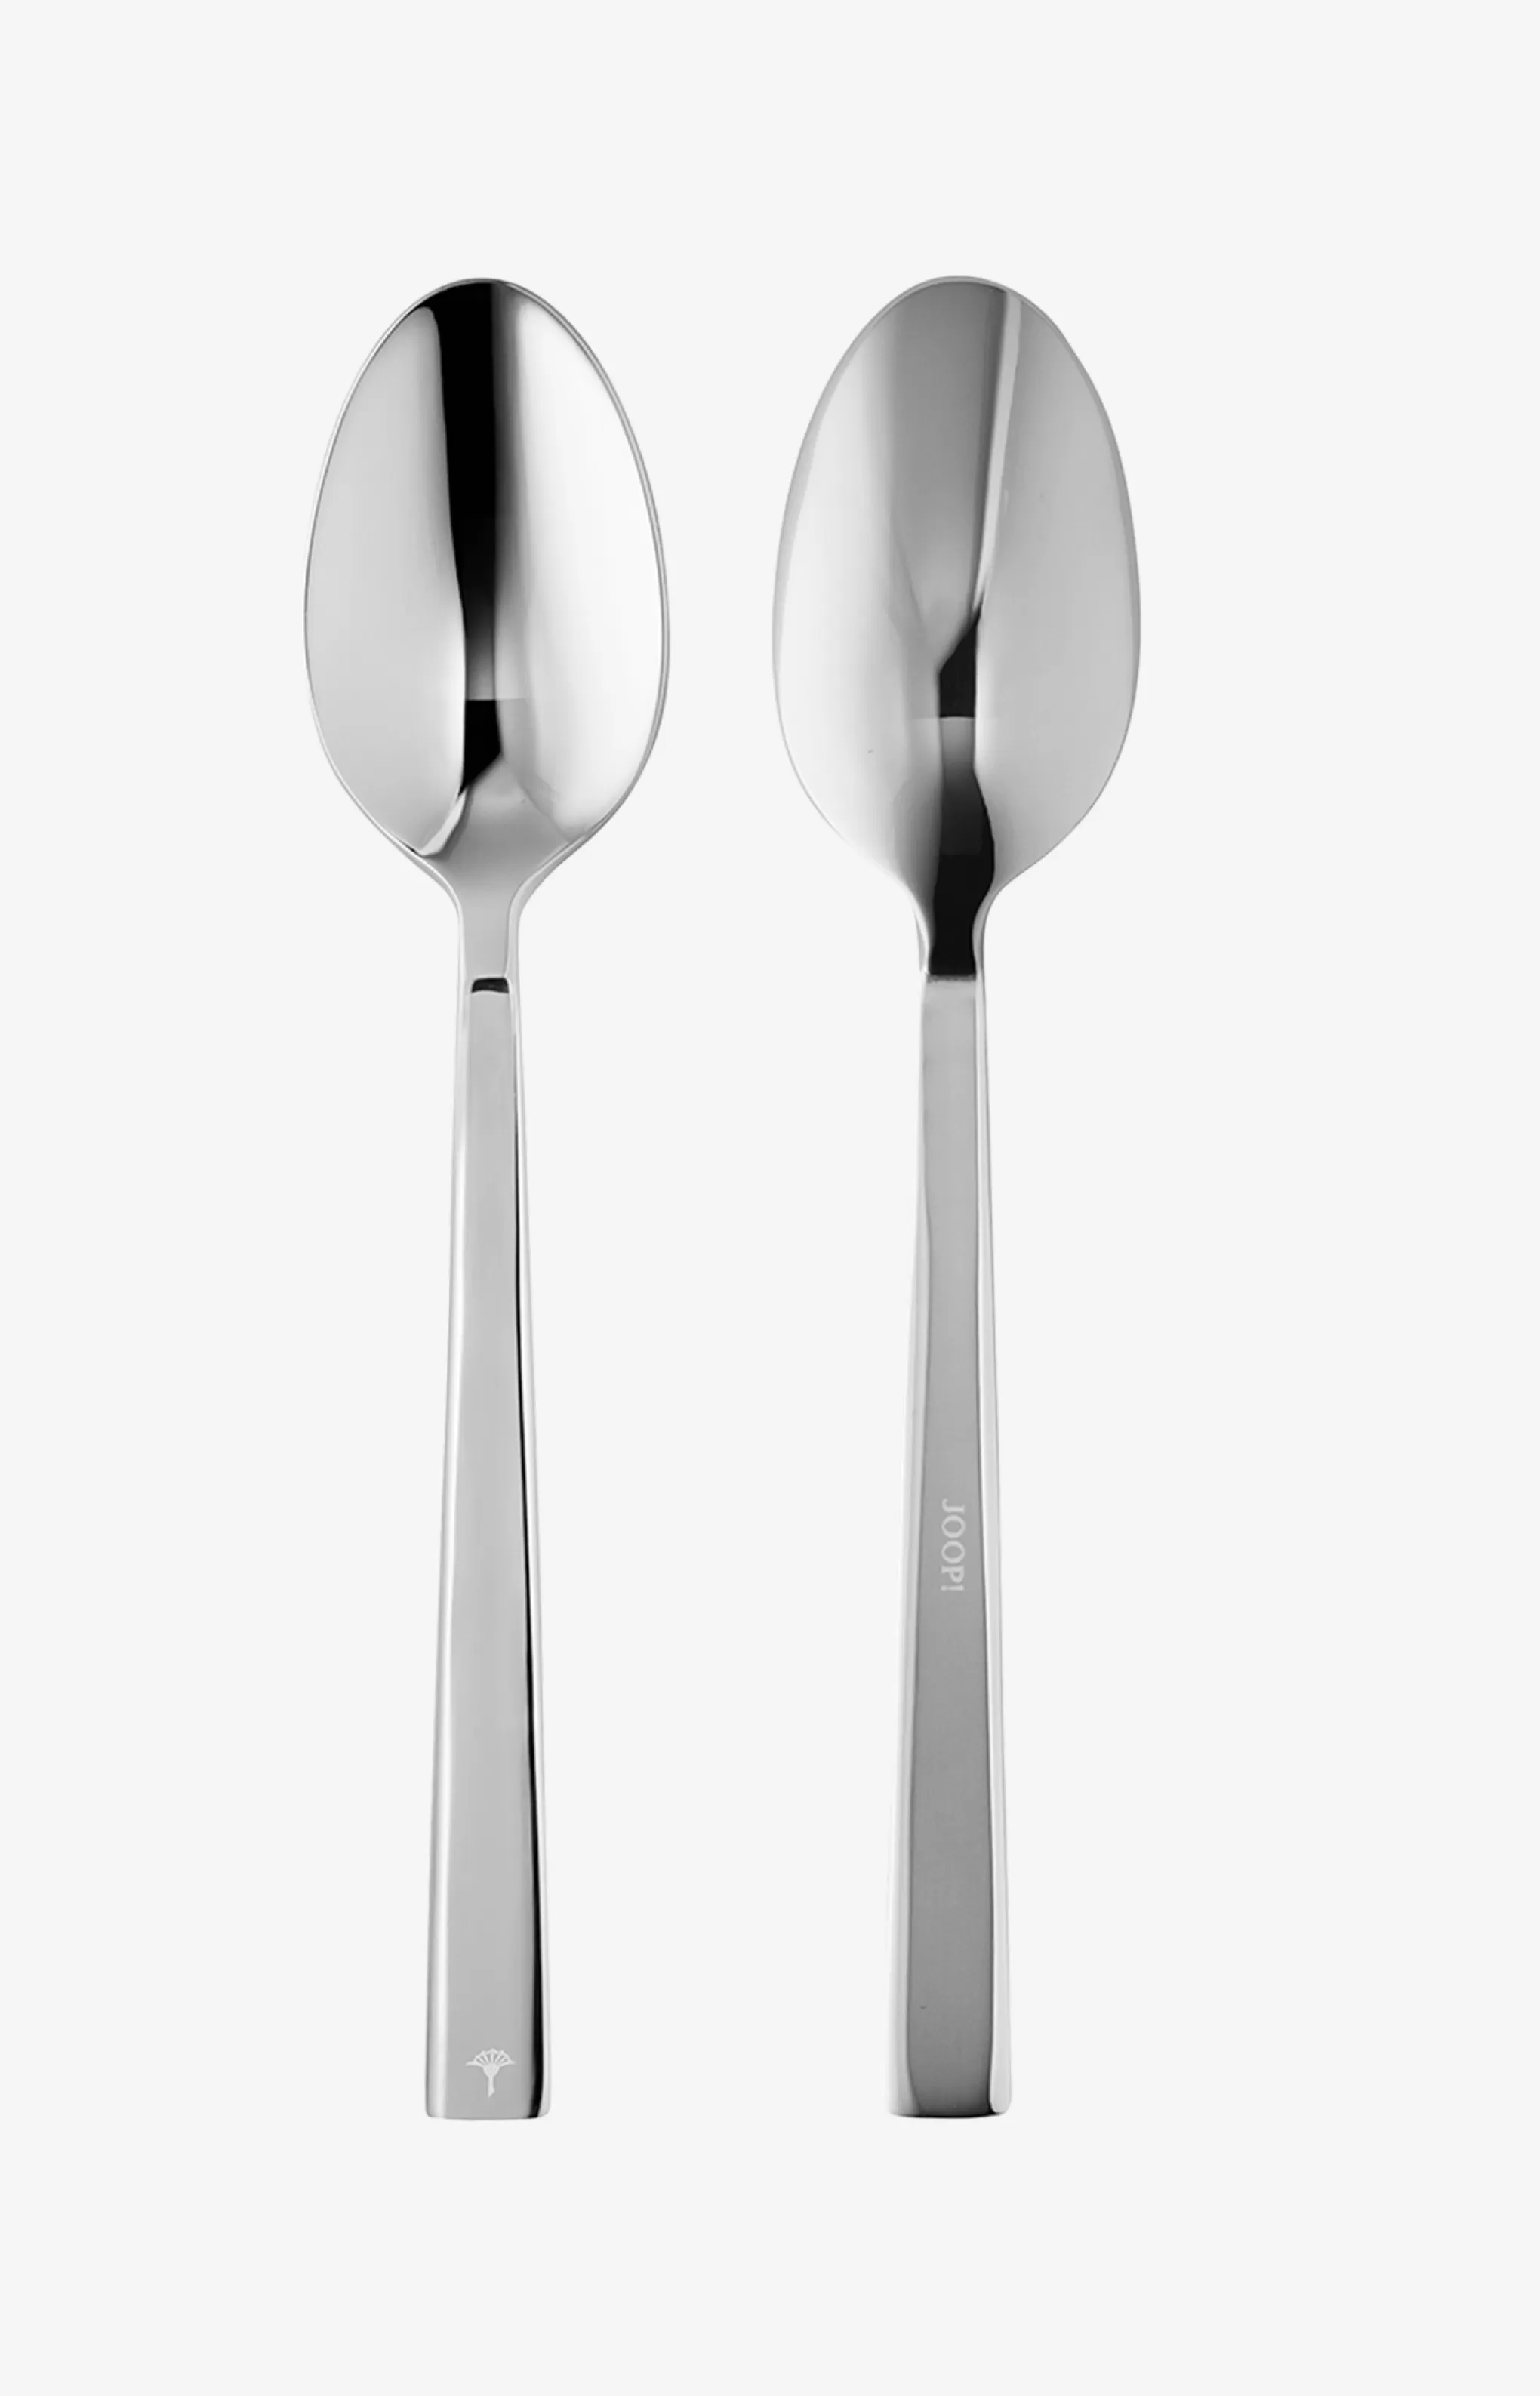 Cutlery | Discover Everything*JOOP Cutlery | Discover Everything Dining Glamour Espresso Spoons - Set of 6 in Shiny Look